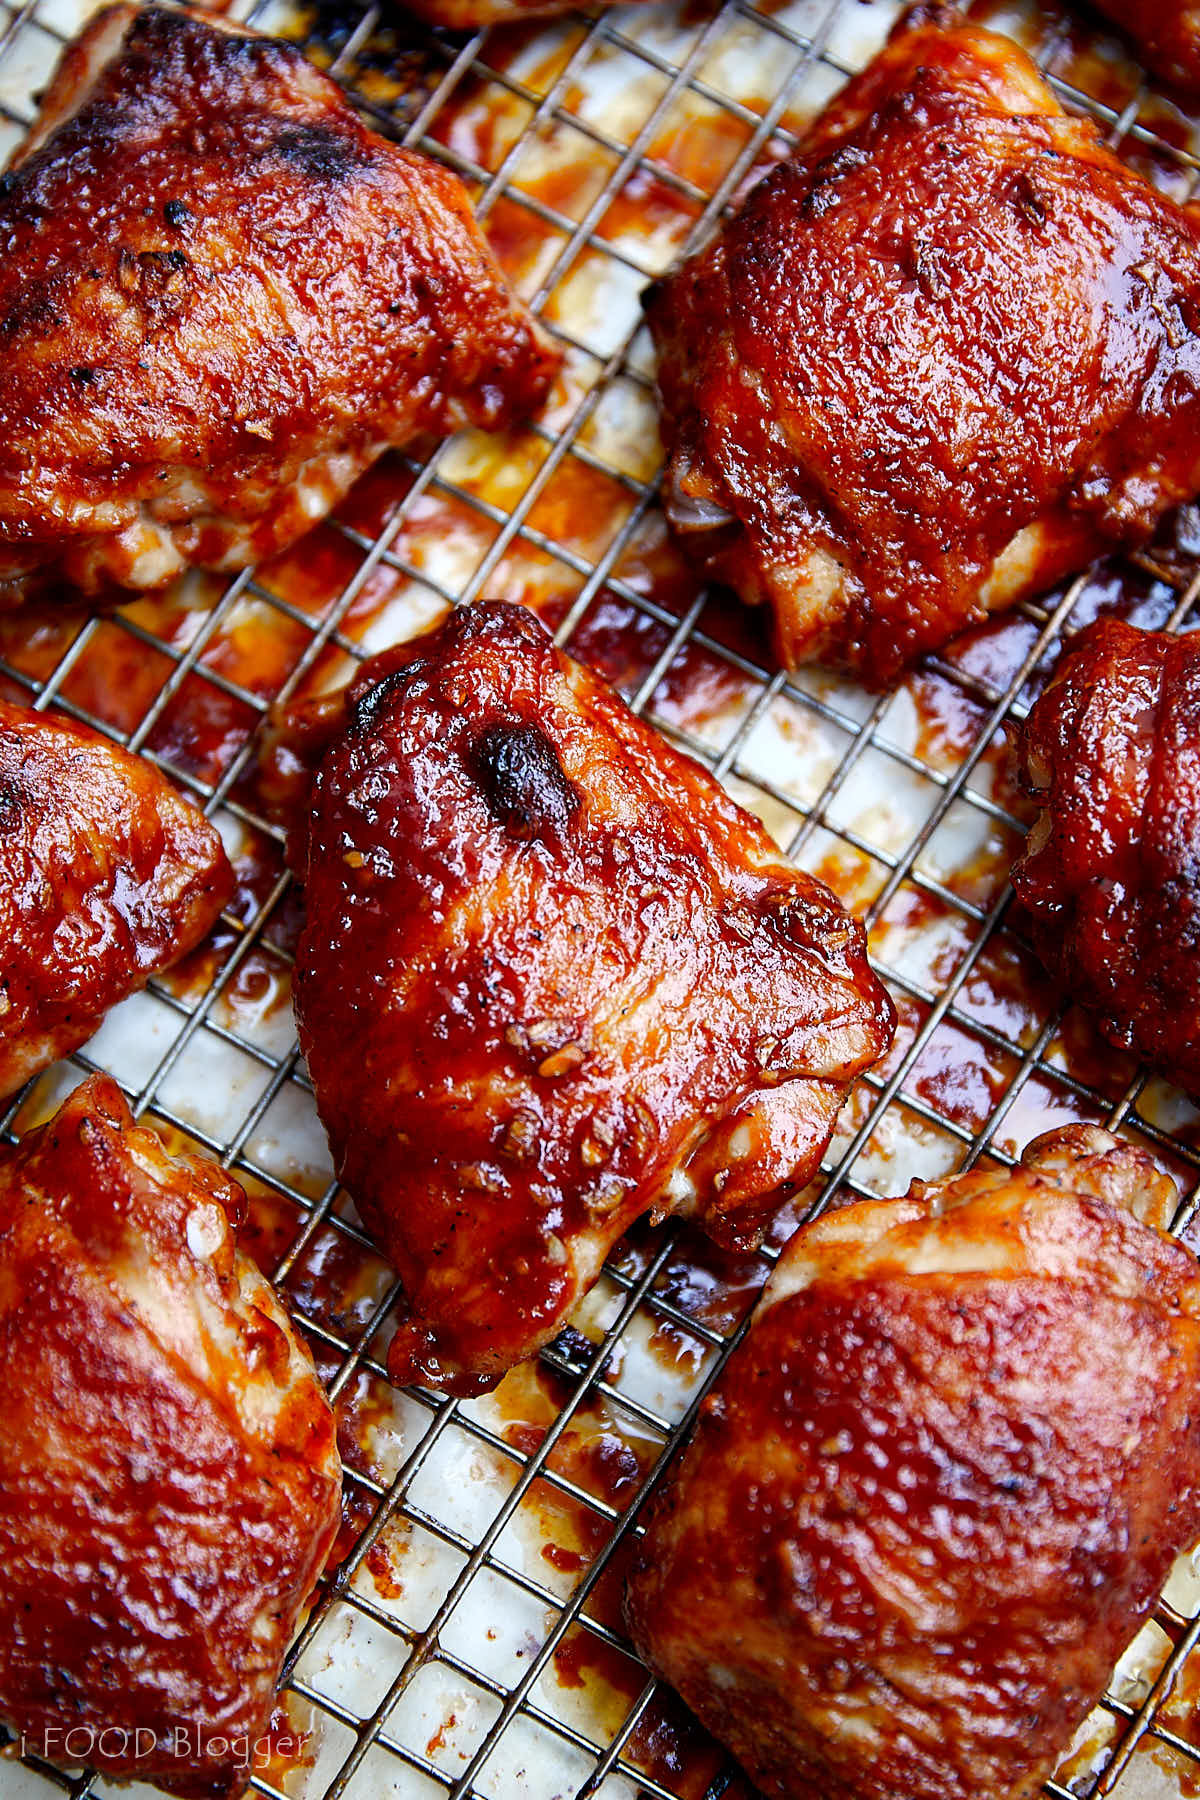 Bbq Chicken Thighs Oven Inspirational Baked Bbq Chicken Thighs I Food Blogger